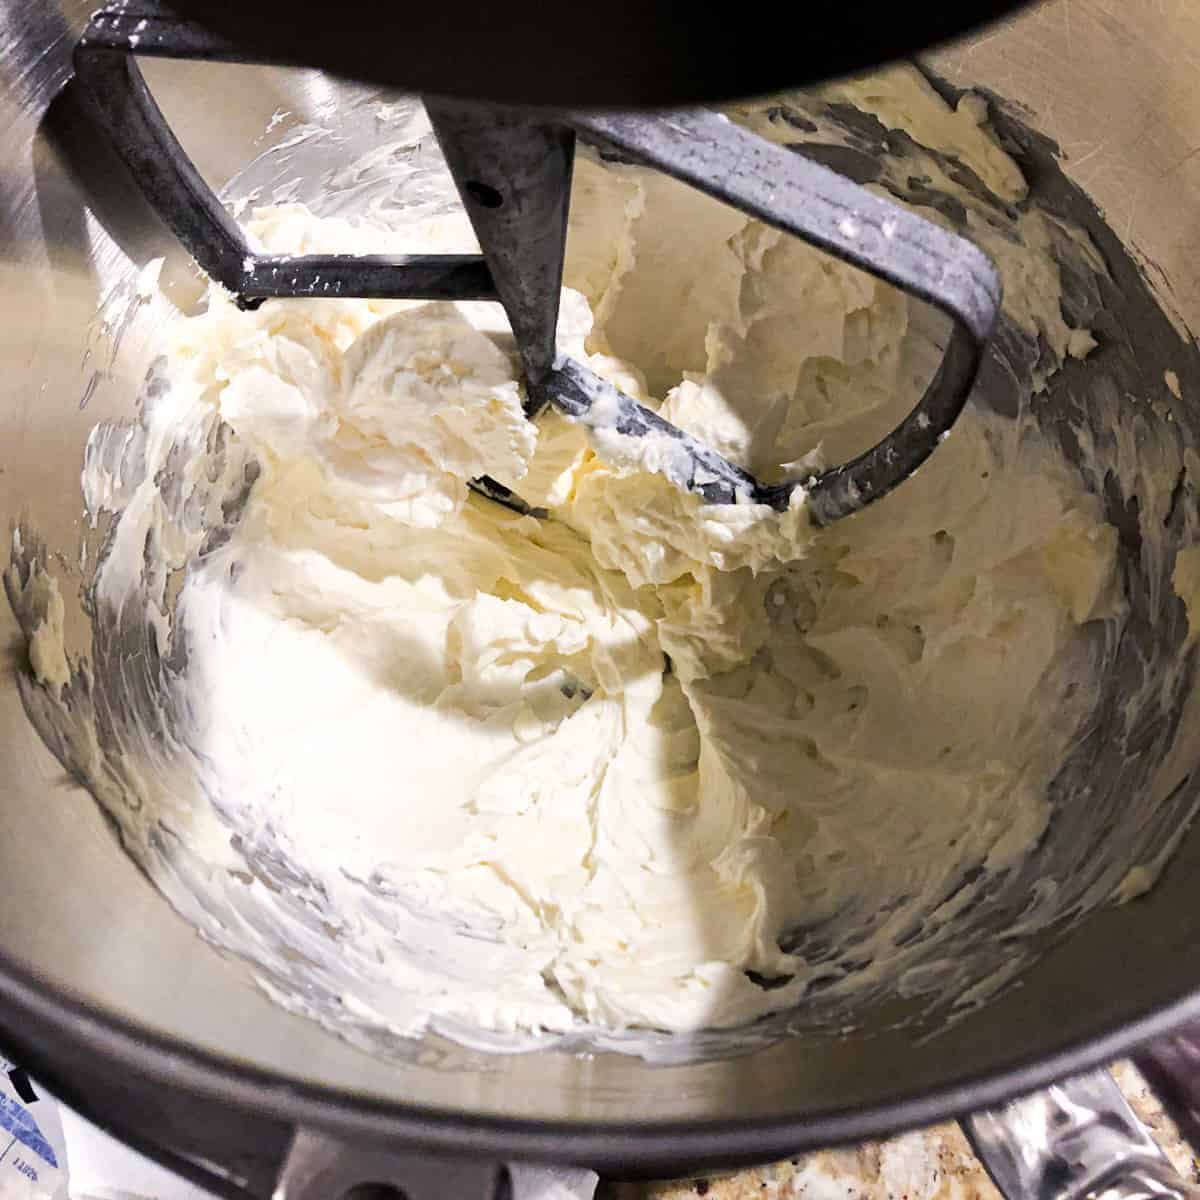 Butter and cream cheese mixed together.